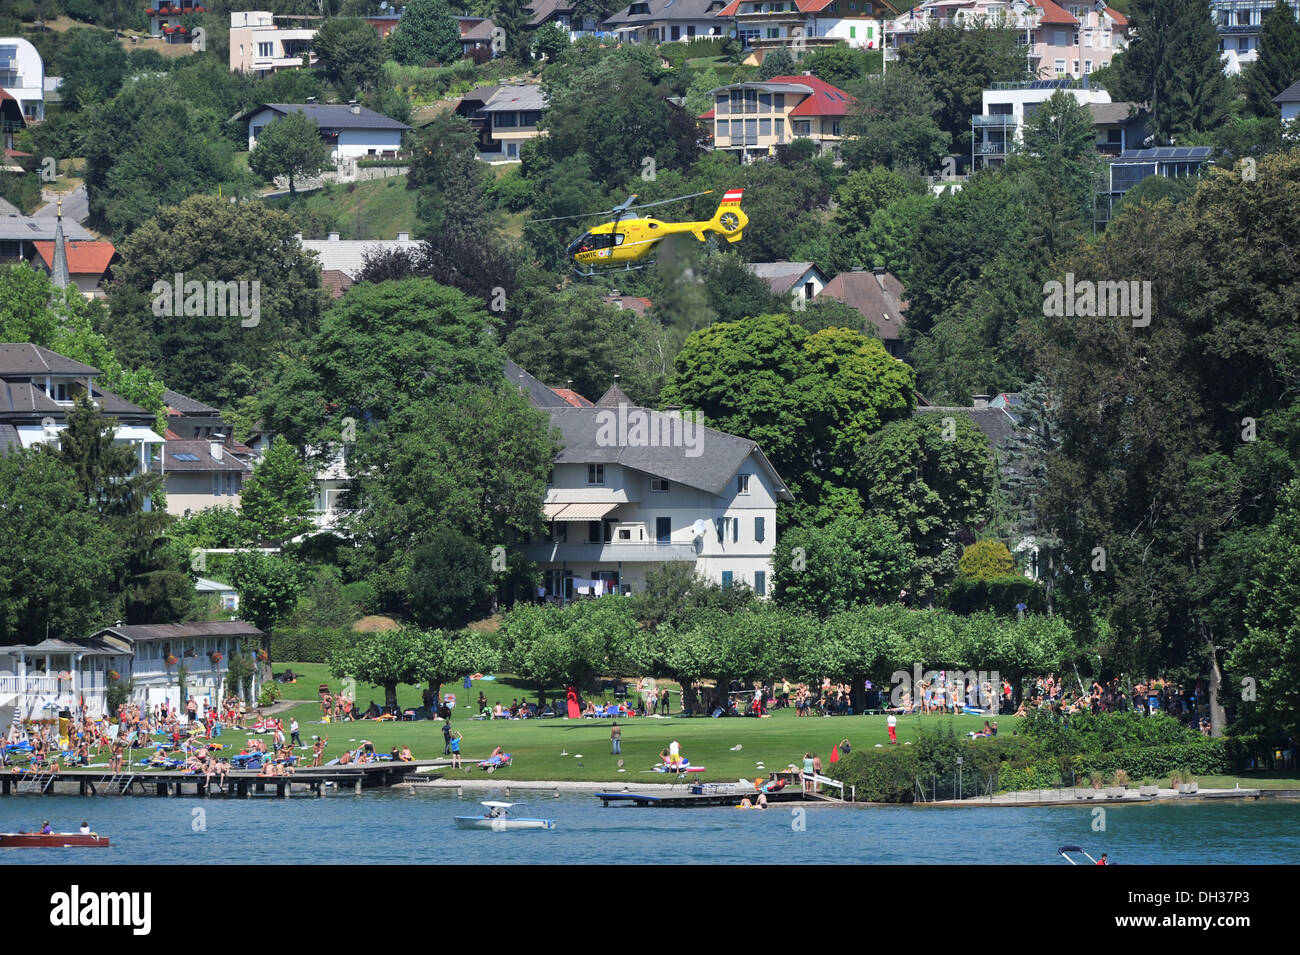 A rescue helicopter lands at the holiday resort of Velden am Worthersee in Austria Stock Photo